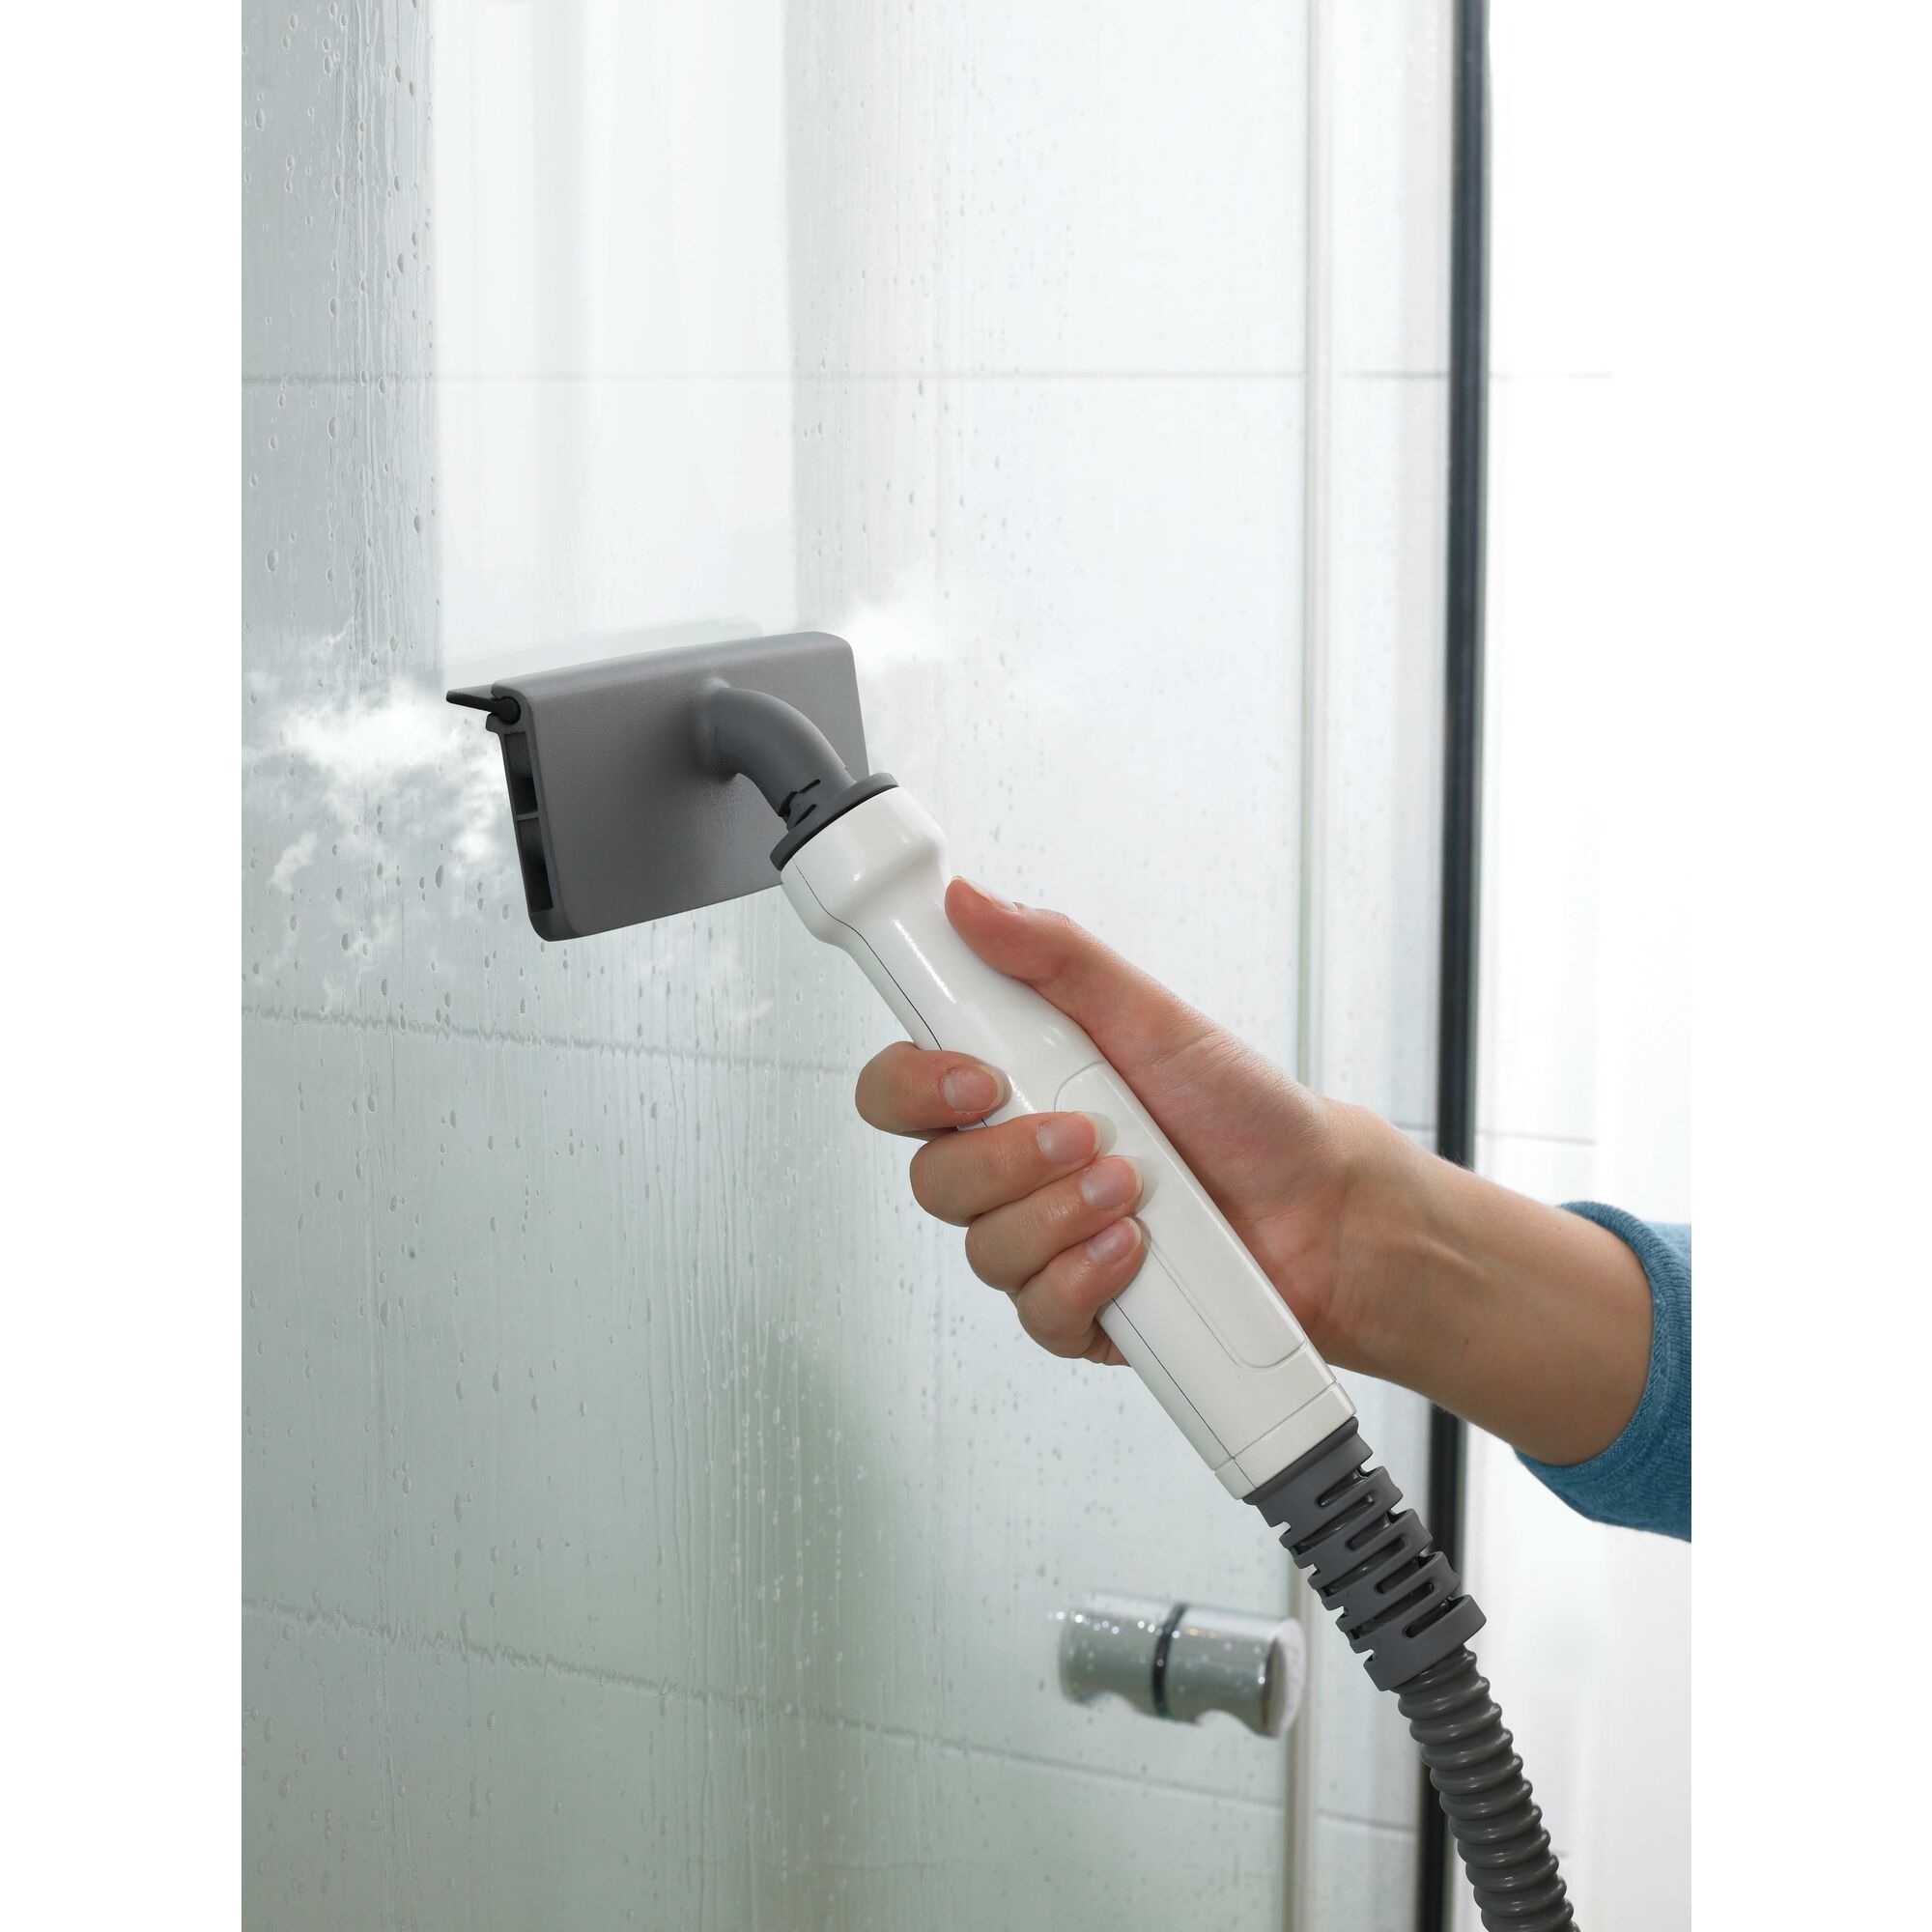 8 in 1 complete steam cleaning system being used to clean glass door in bathroom.